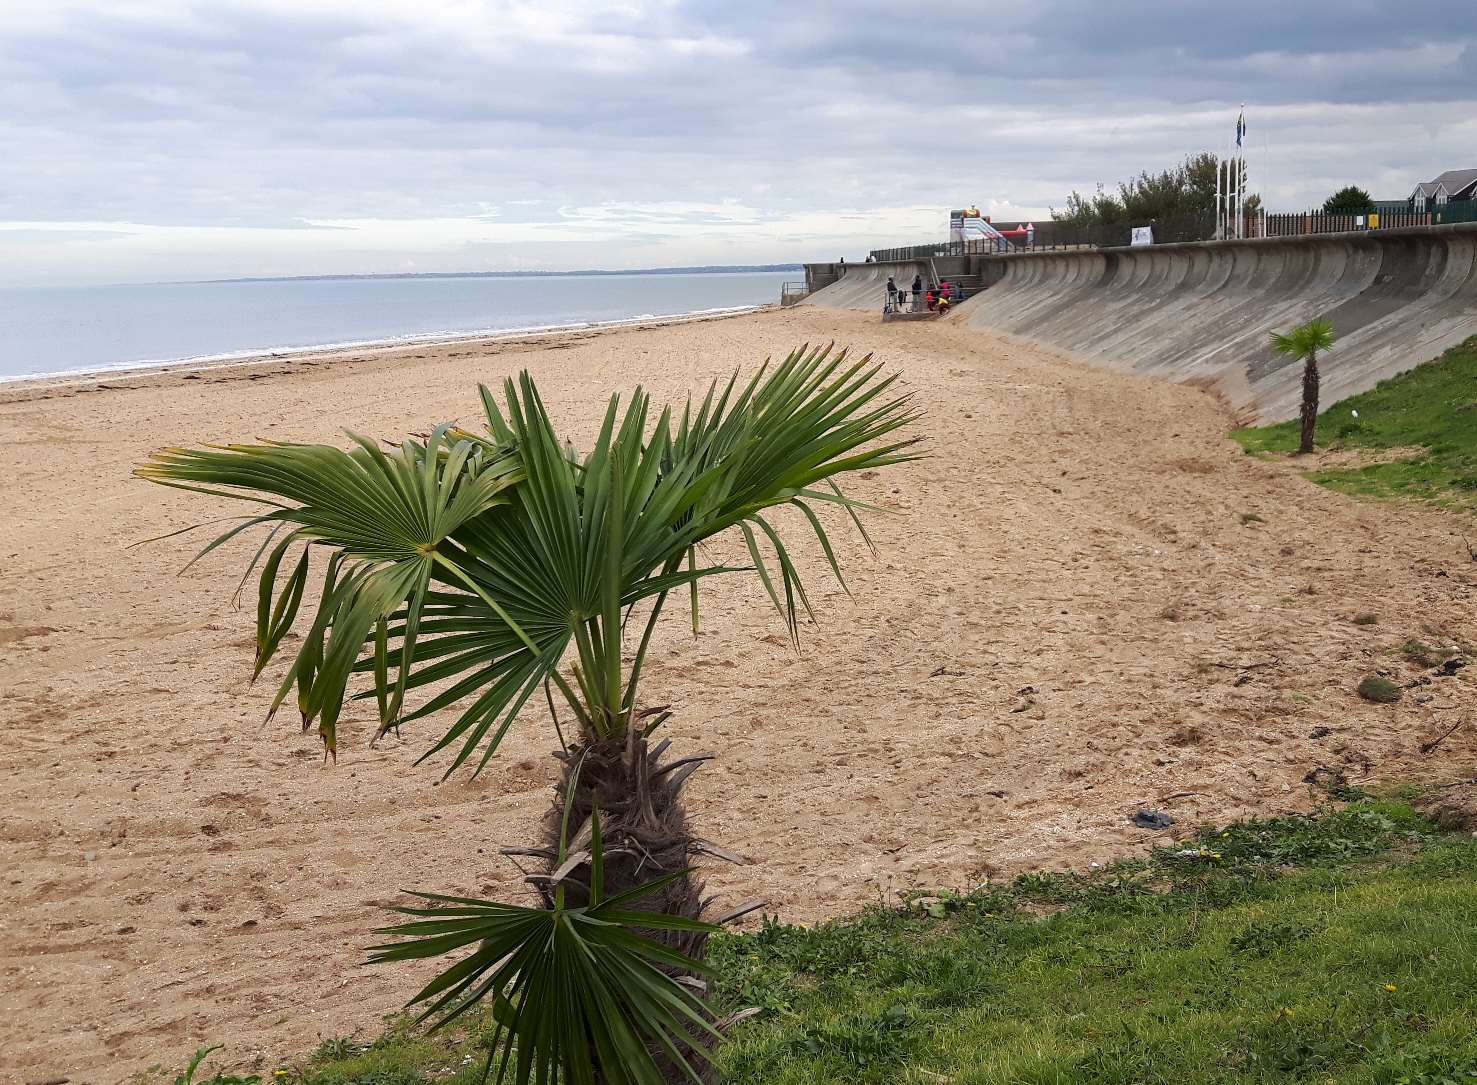 Palm trees at Leysdown. Cosgrove Leisure says it is turning its private beach into an asset.